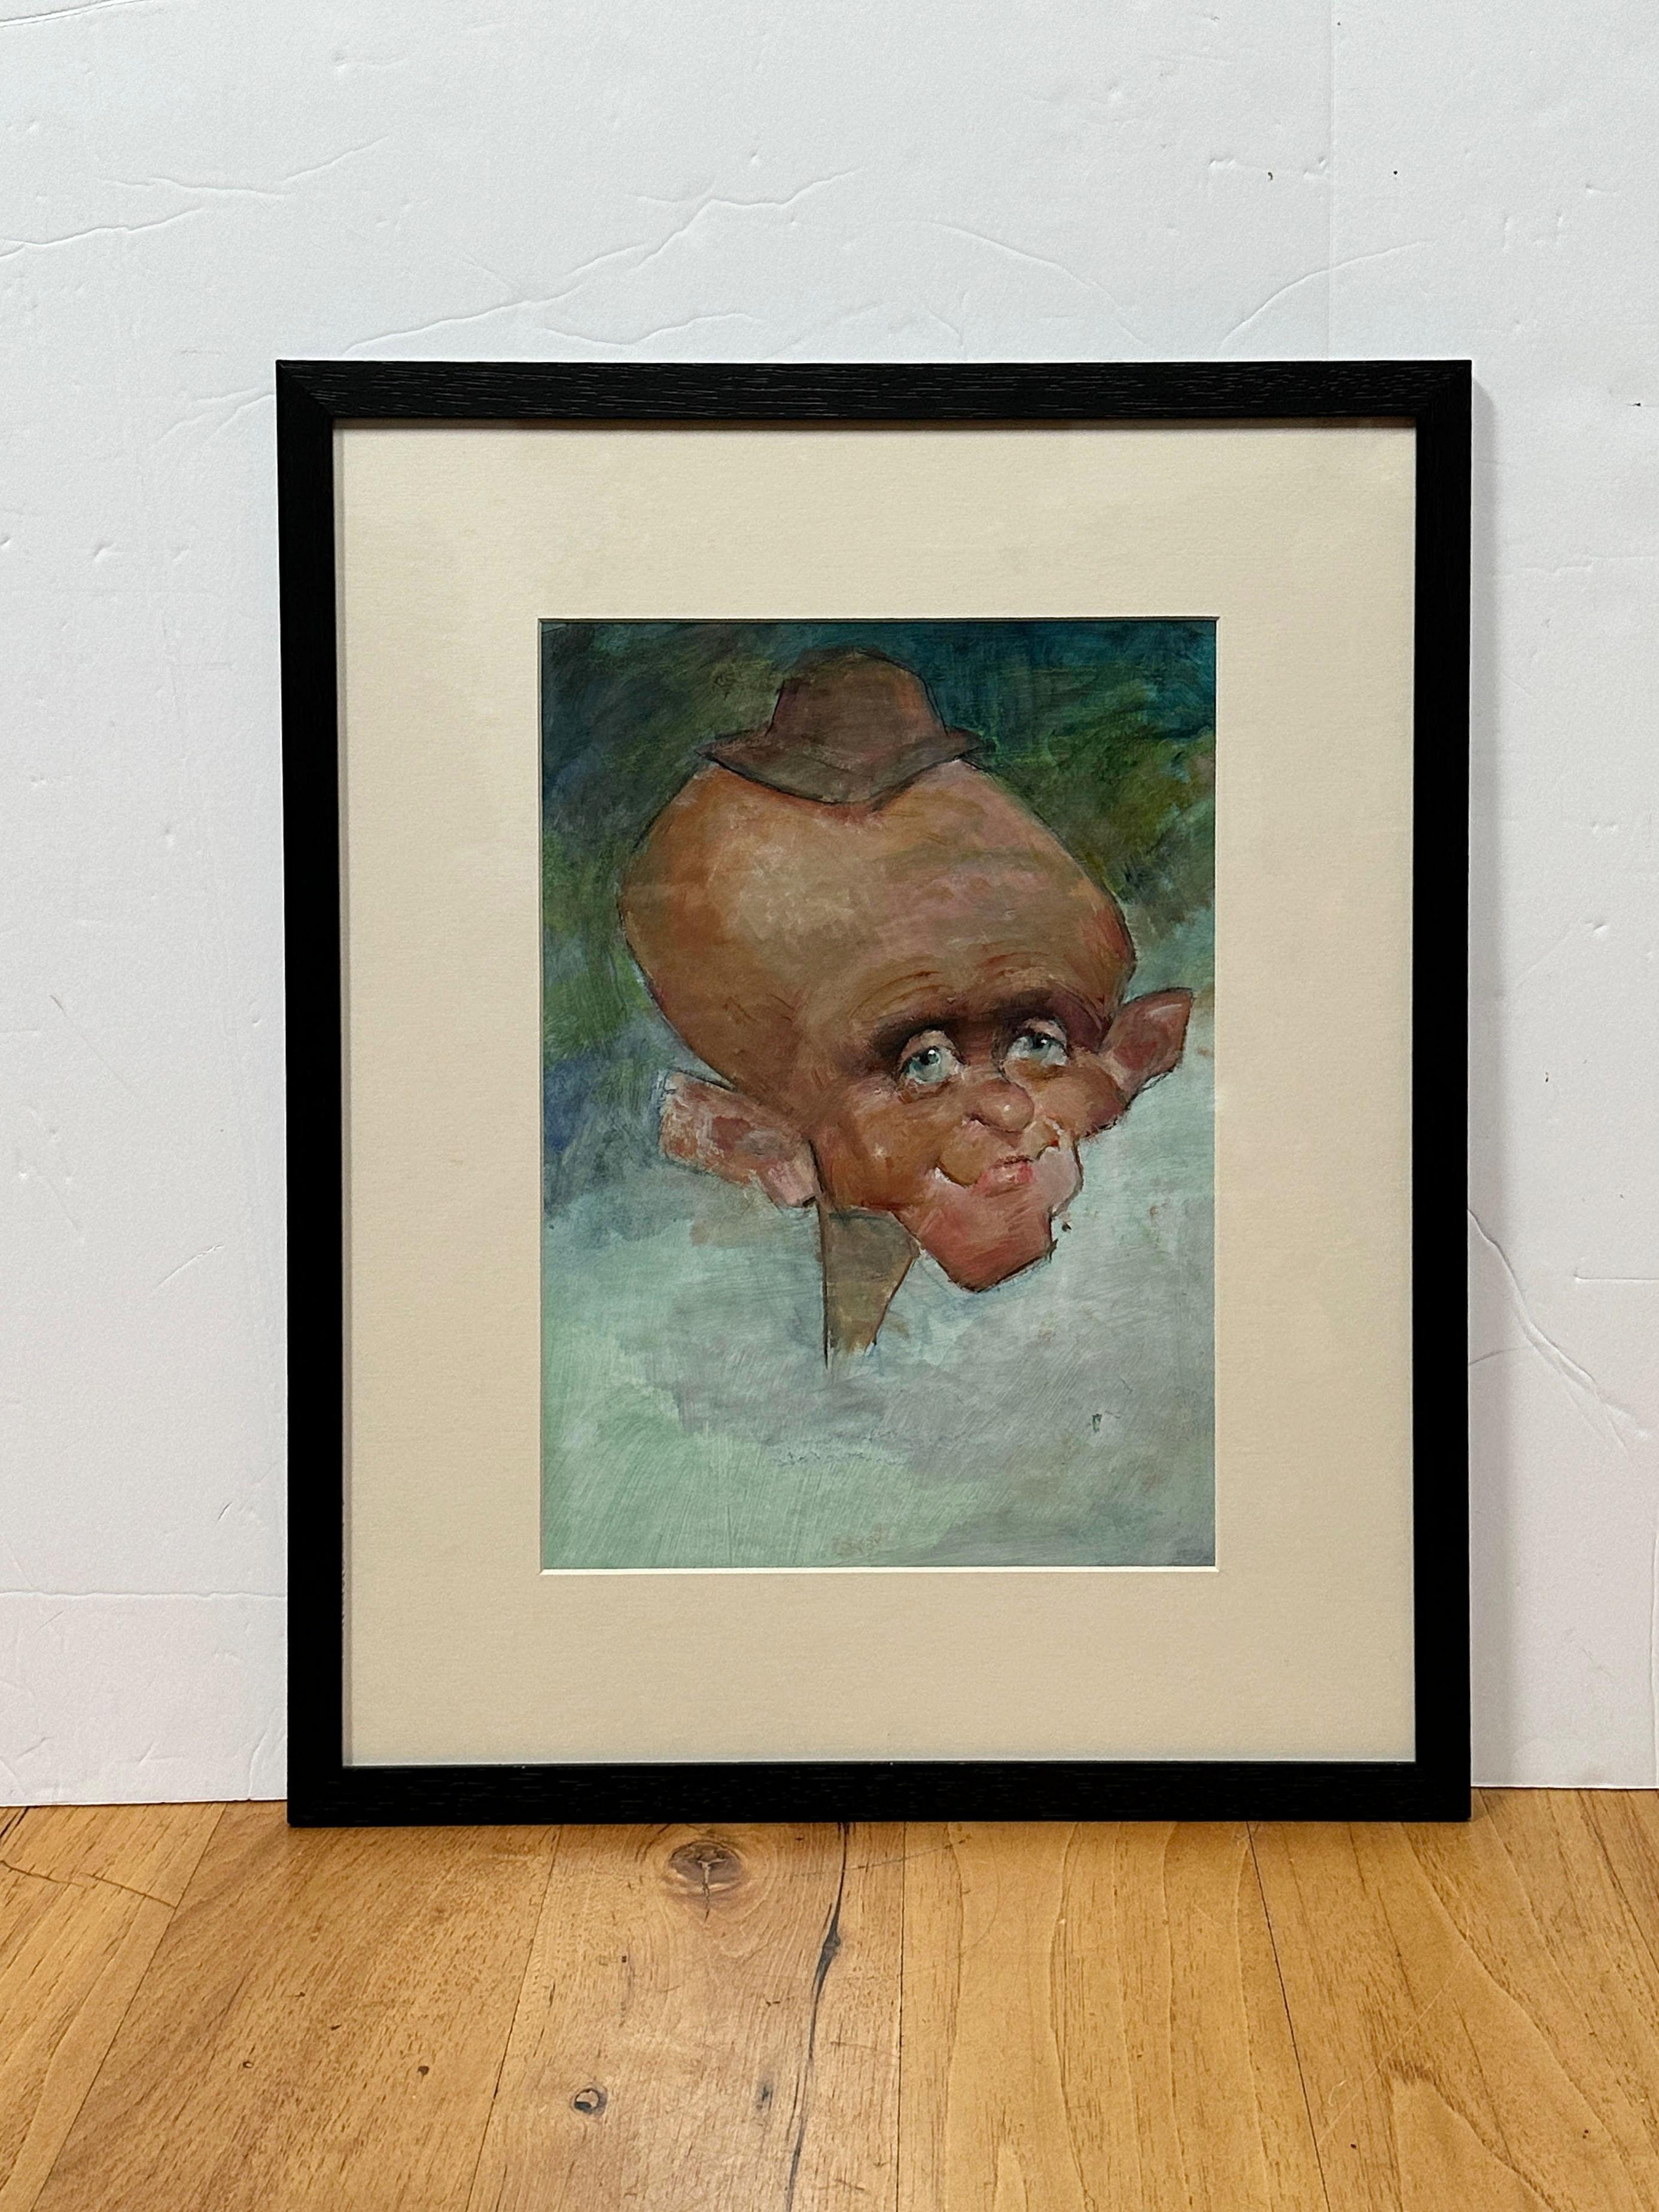  Caricatural Portrait - Gouache on Paper by Max Turner  - Art by MAX TURNER